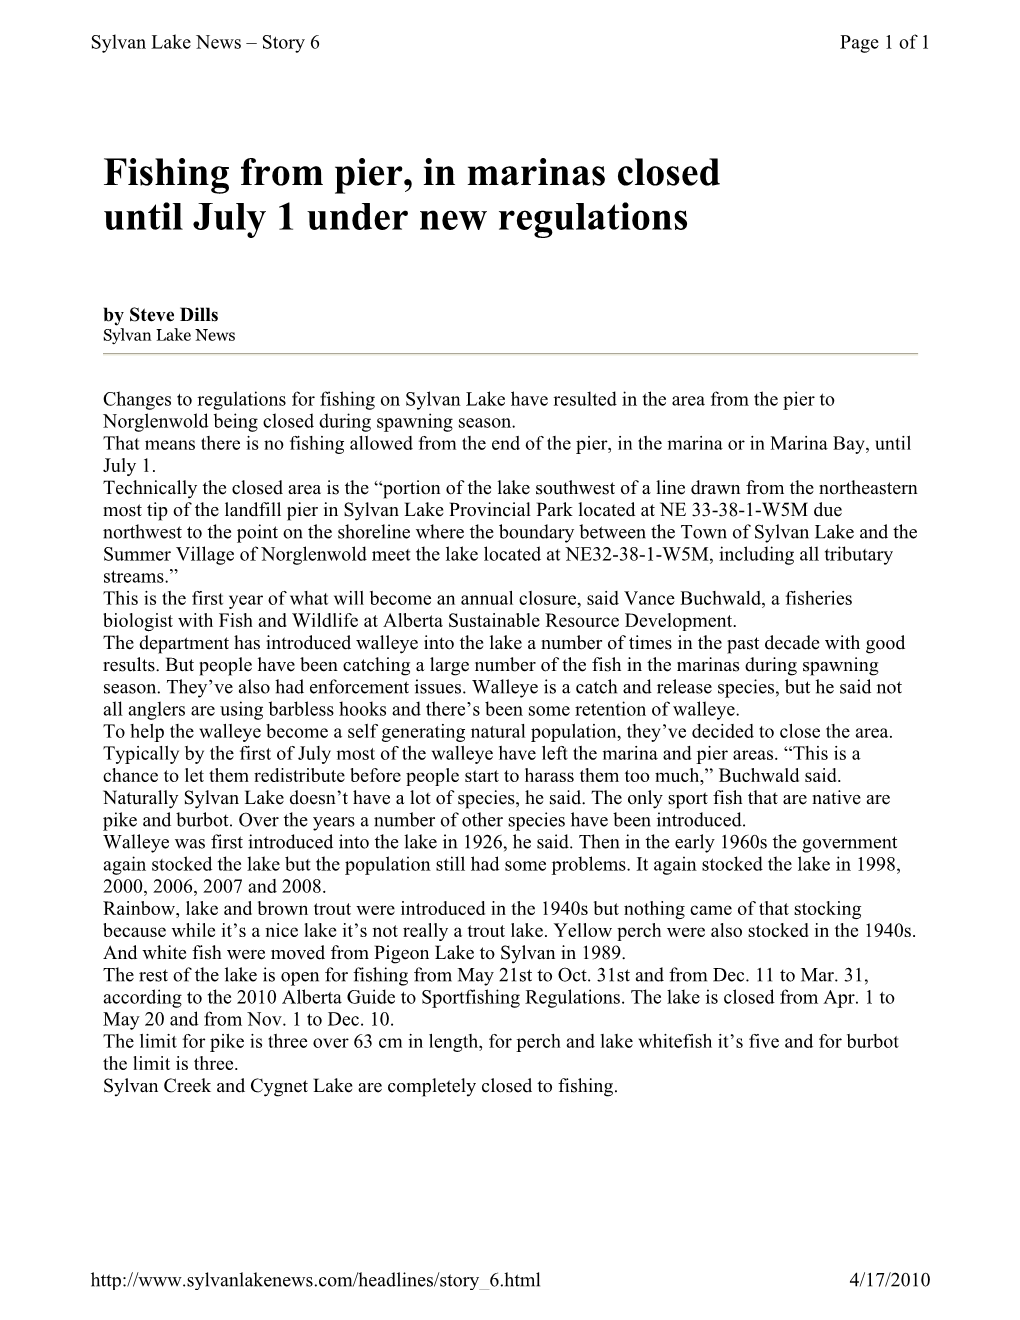 Fishing from Pier, in Marinas Closed Until July 1 Under New Regulations